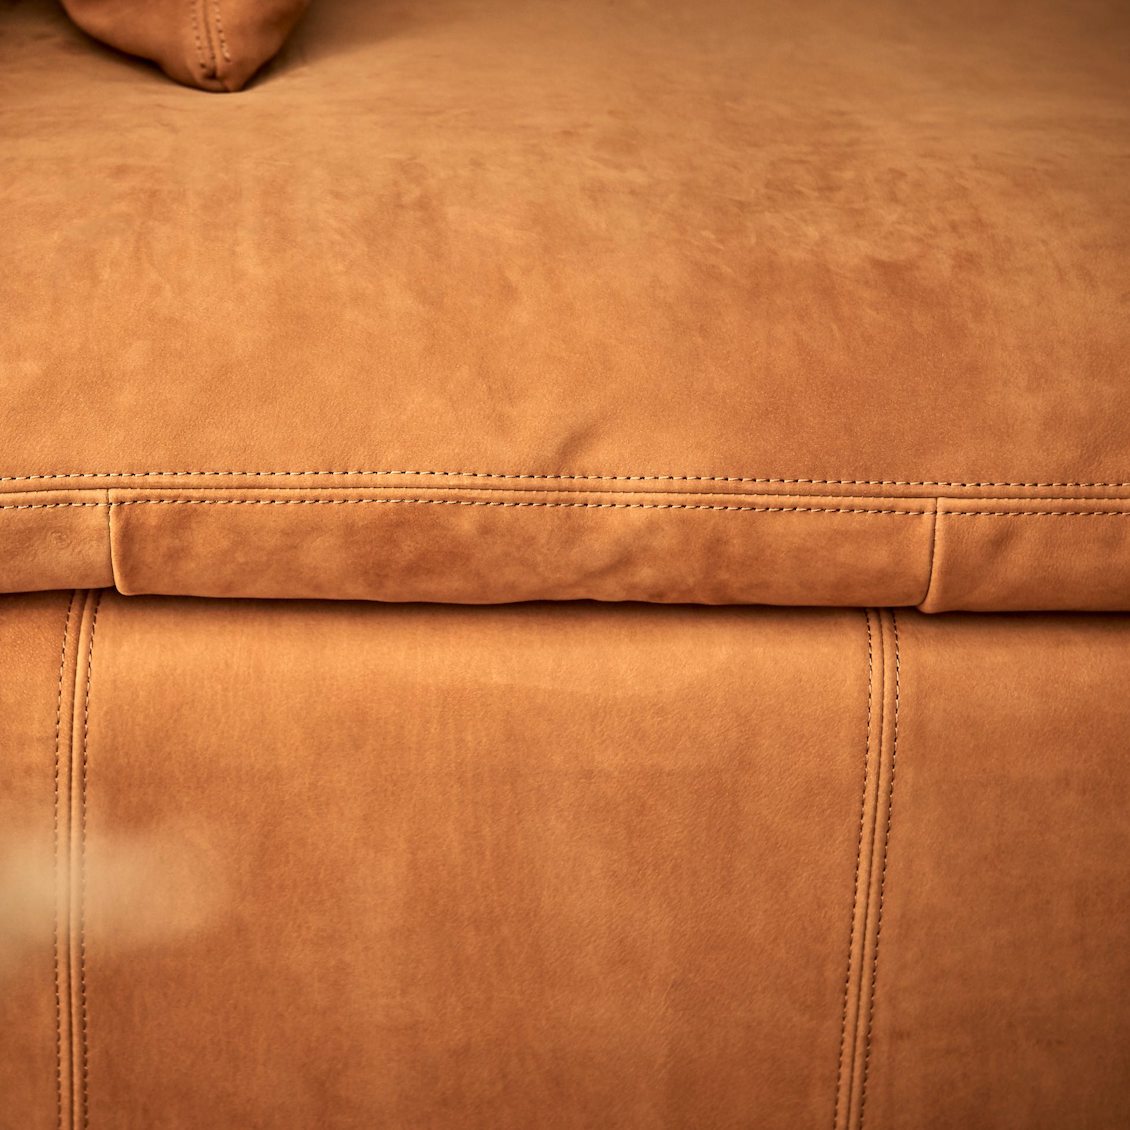 Caring for Meridian Leather.